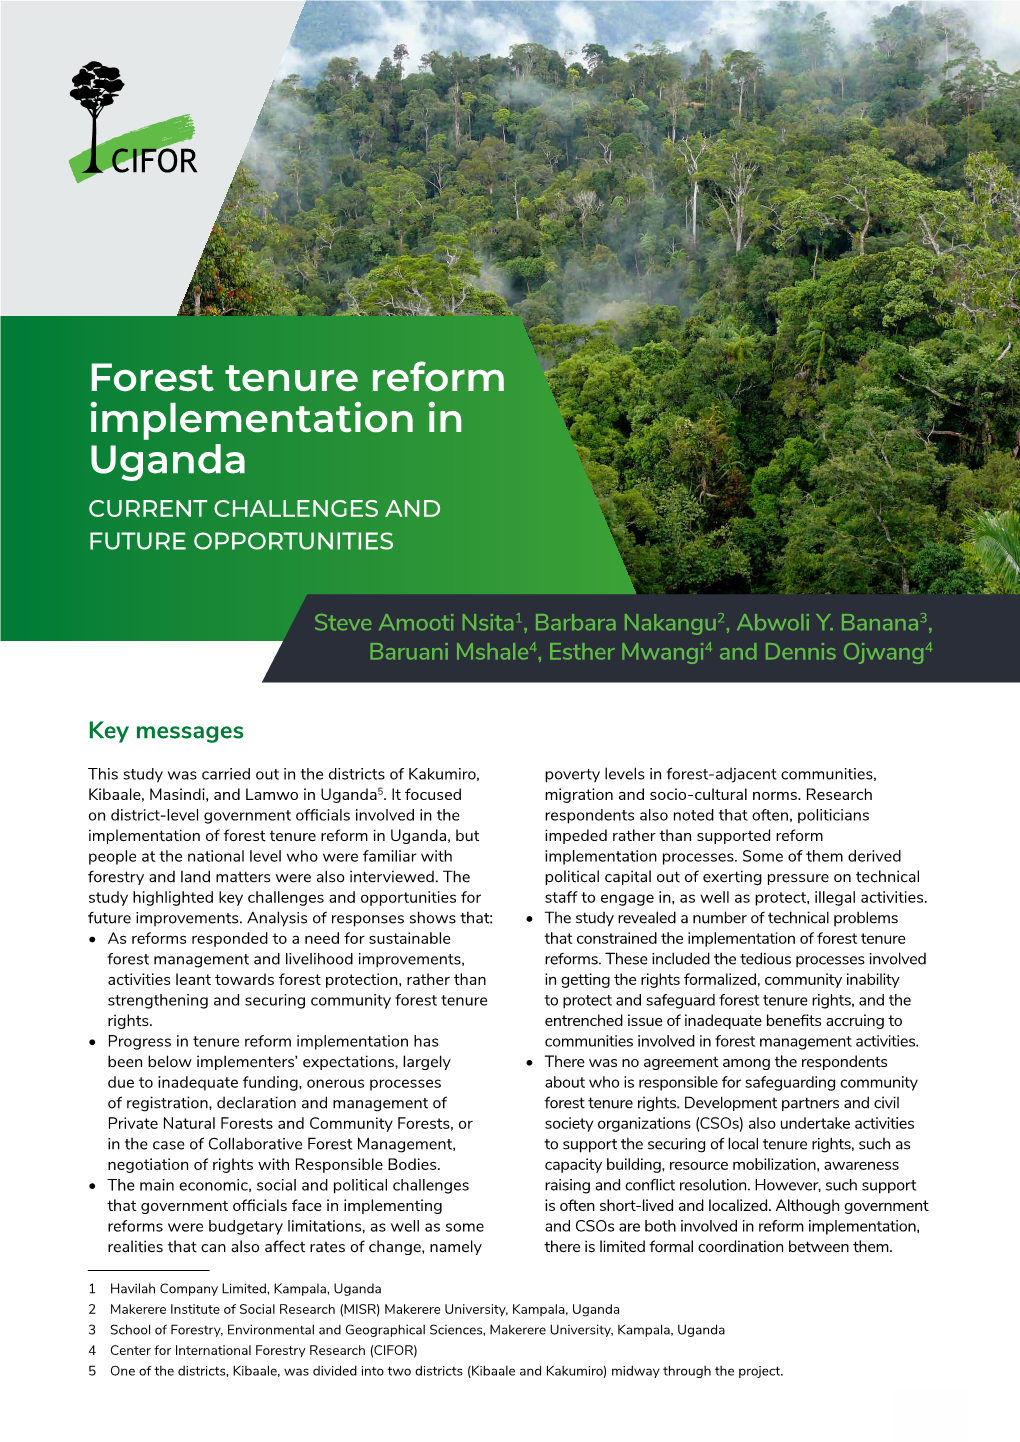 Forest Tenure Reform Implementation in Uganda CURRENT CHALLENGES and FUTURE OPPORTUNITIES